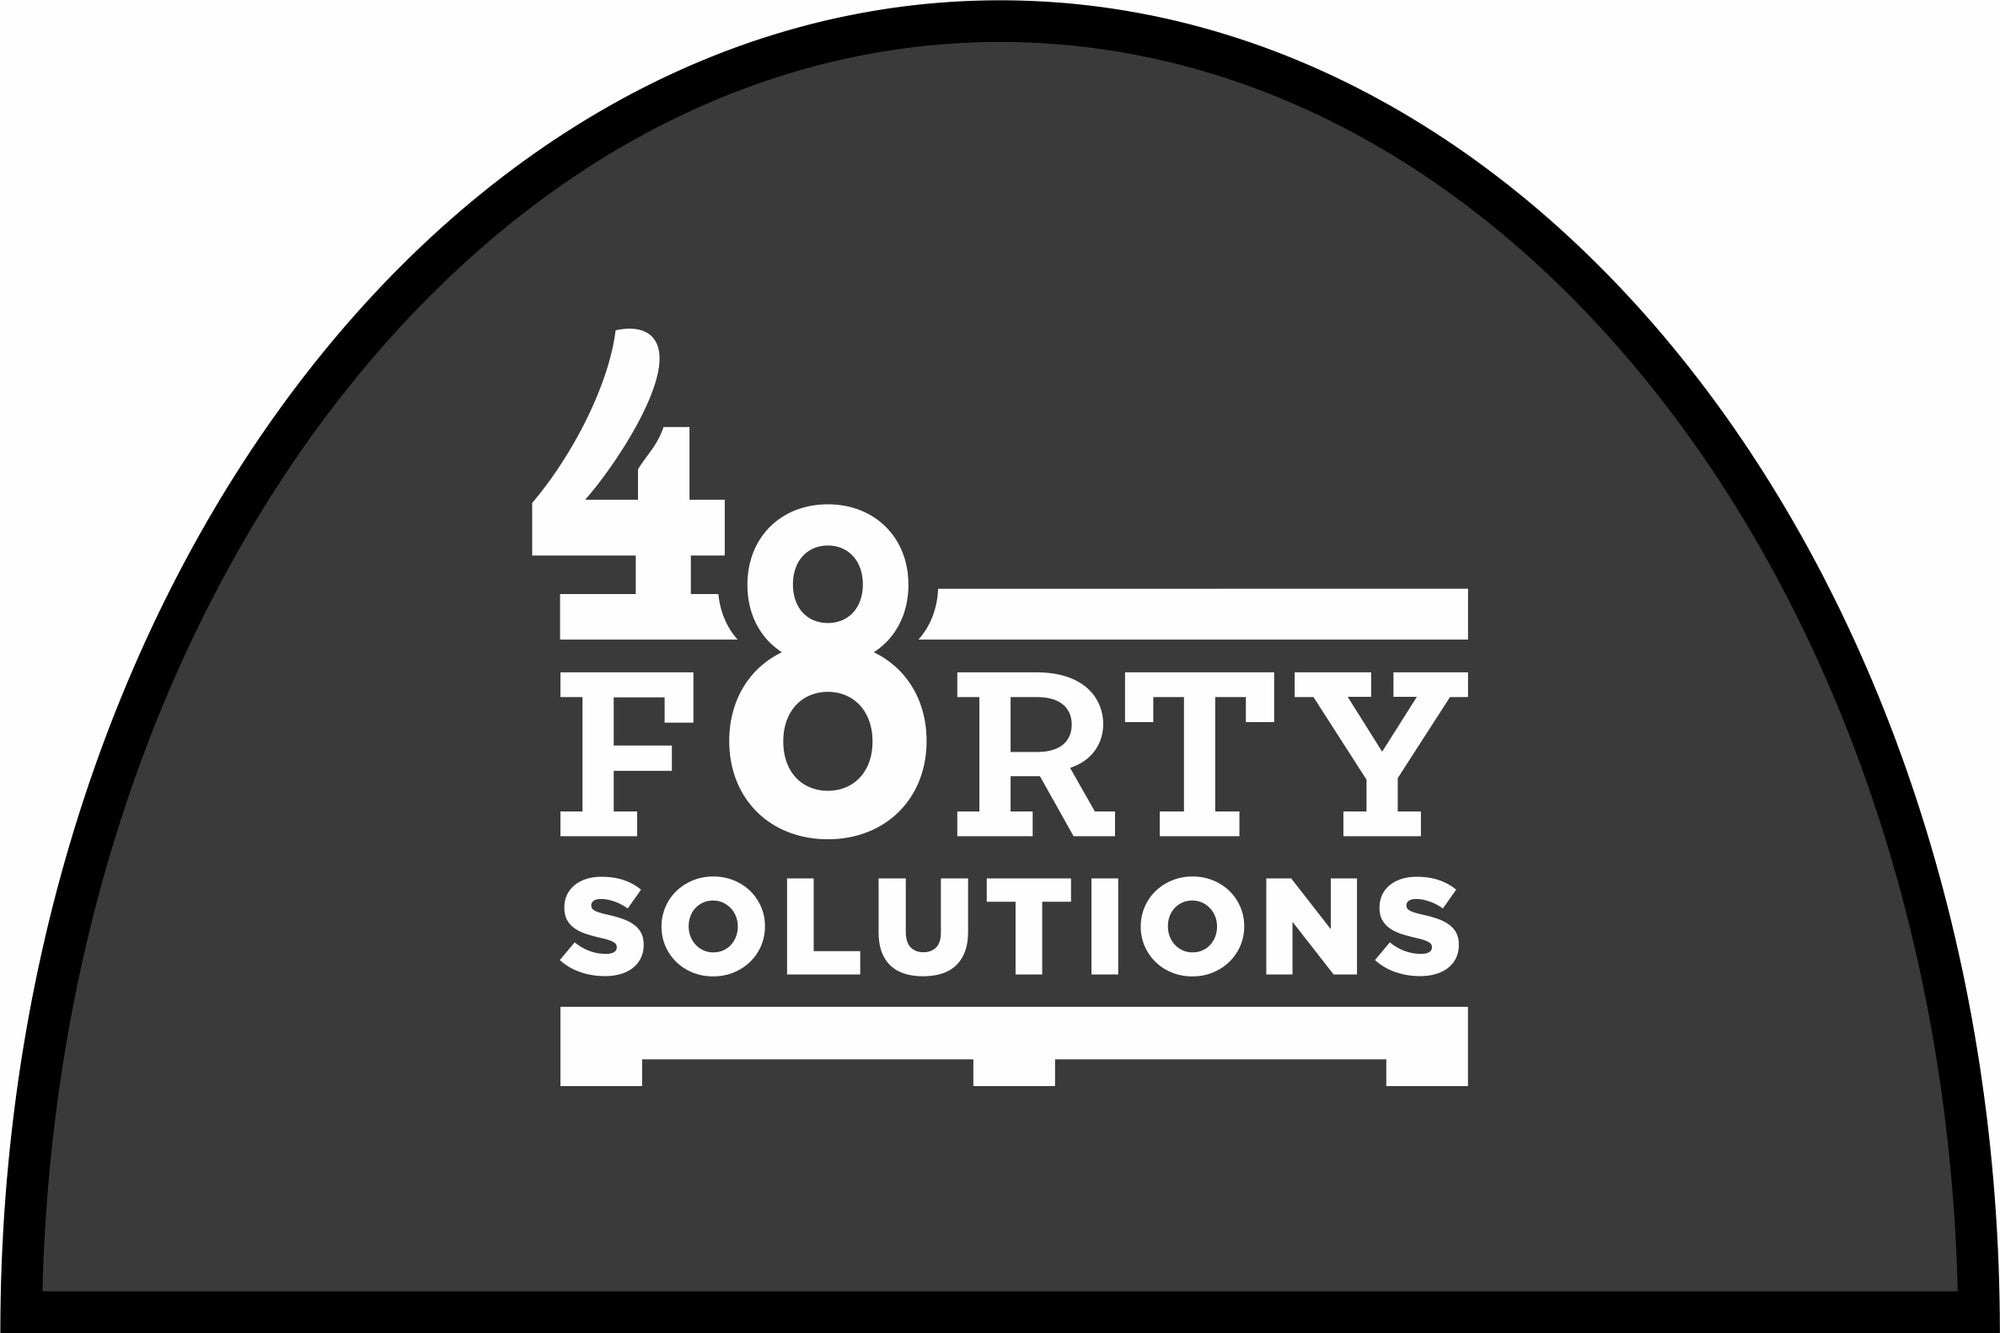 48forty Solutions Rich Charcoal §